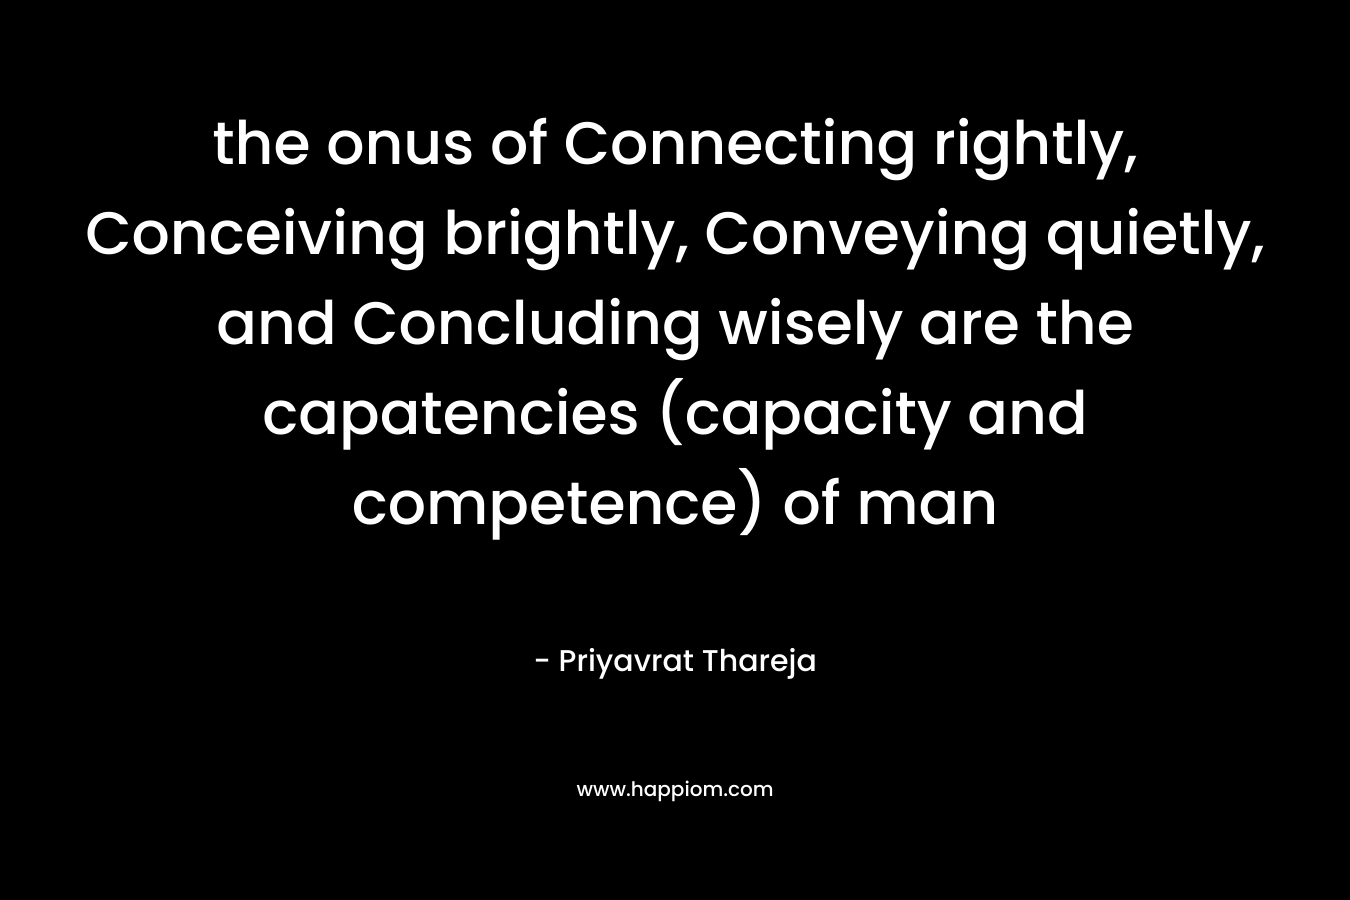 the onus of Connecting rightly, Conceiving brightly, Conveying quietly, and Concluding wisely are the capatencies (capacity and competence) of man